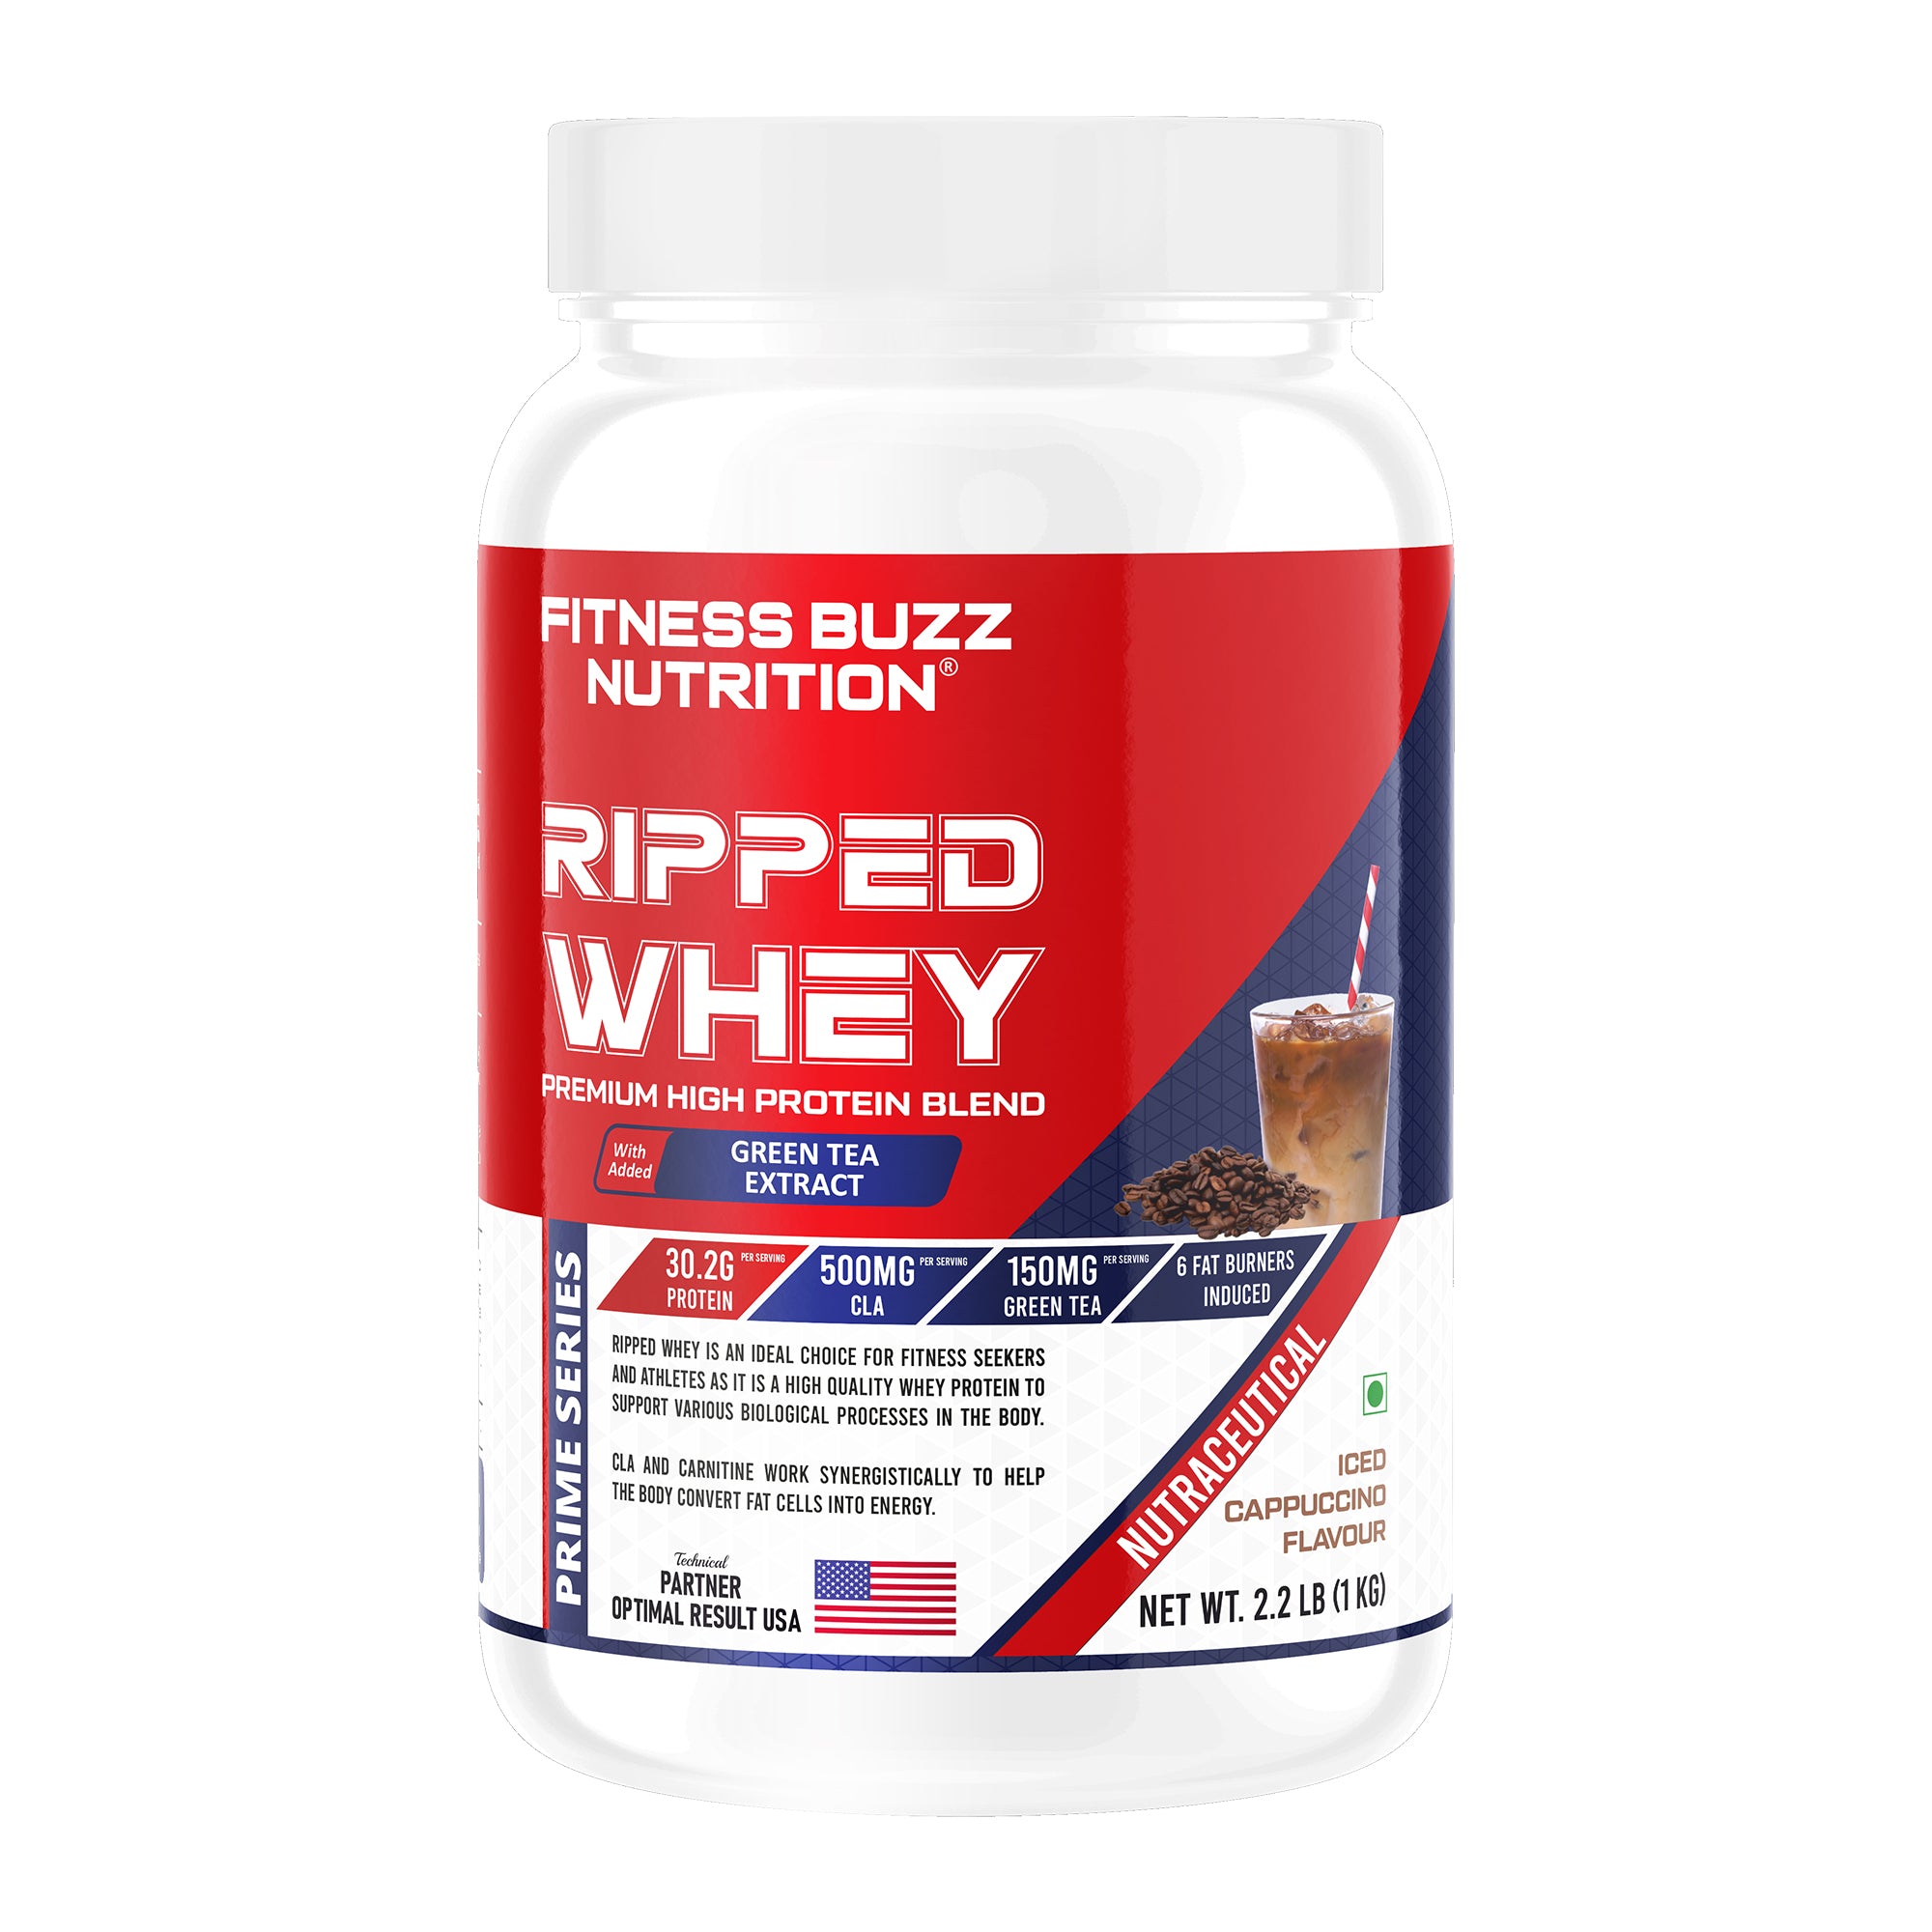 FITNESS BUZZ NUTRITION RIPPED WHEY 1KG (ICED CAPPUCCINO)